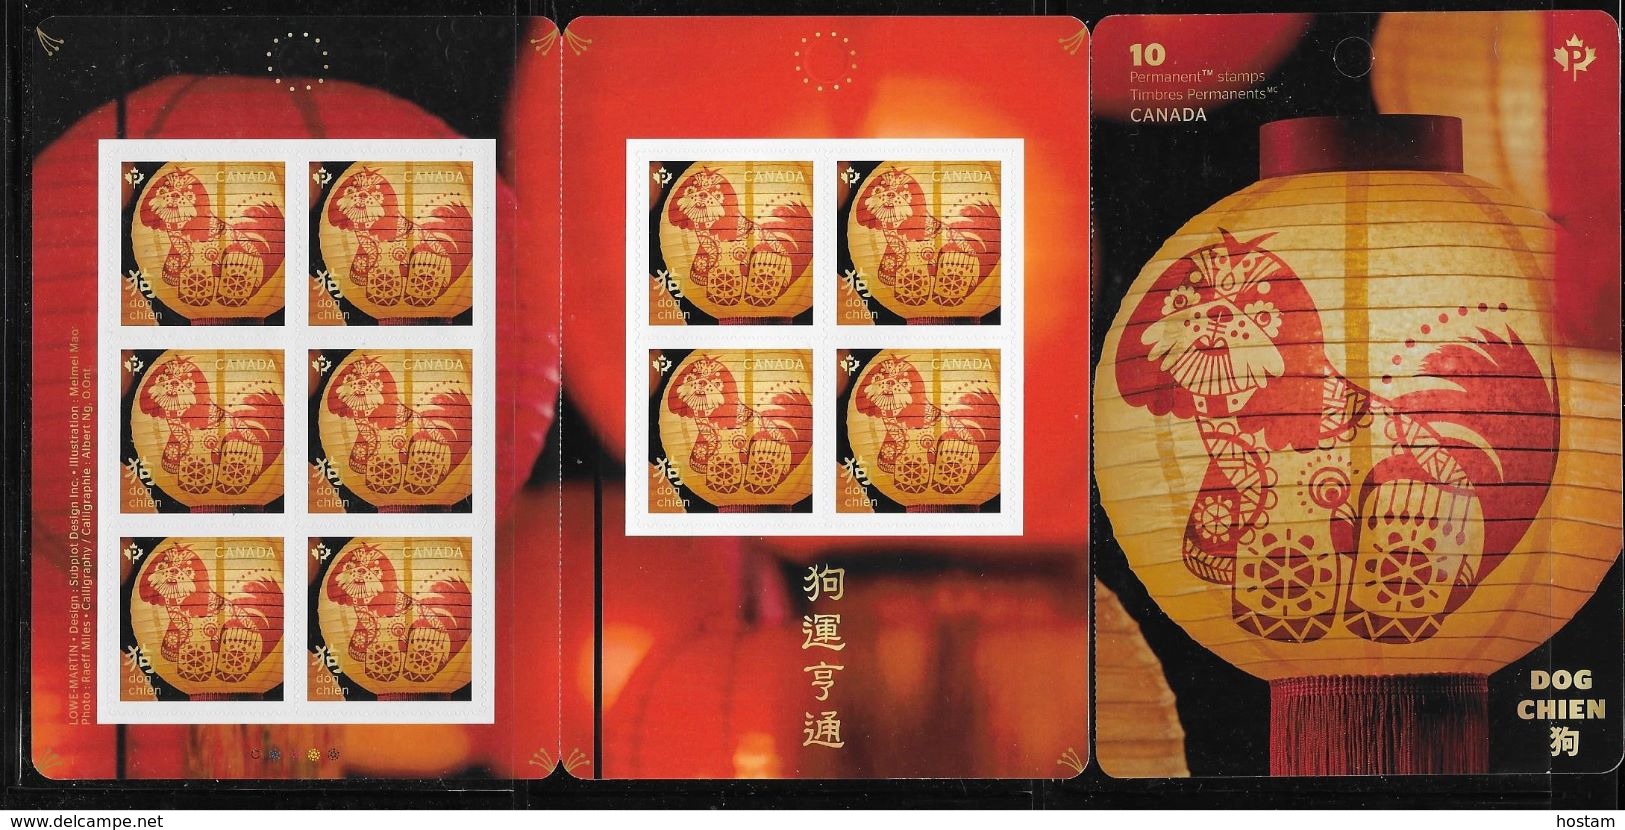 2018  CANADA YEAR OF THE DOG    Booklet Of 10 Permanent  Stamps - Full Booklets